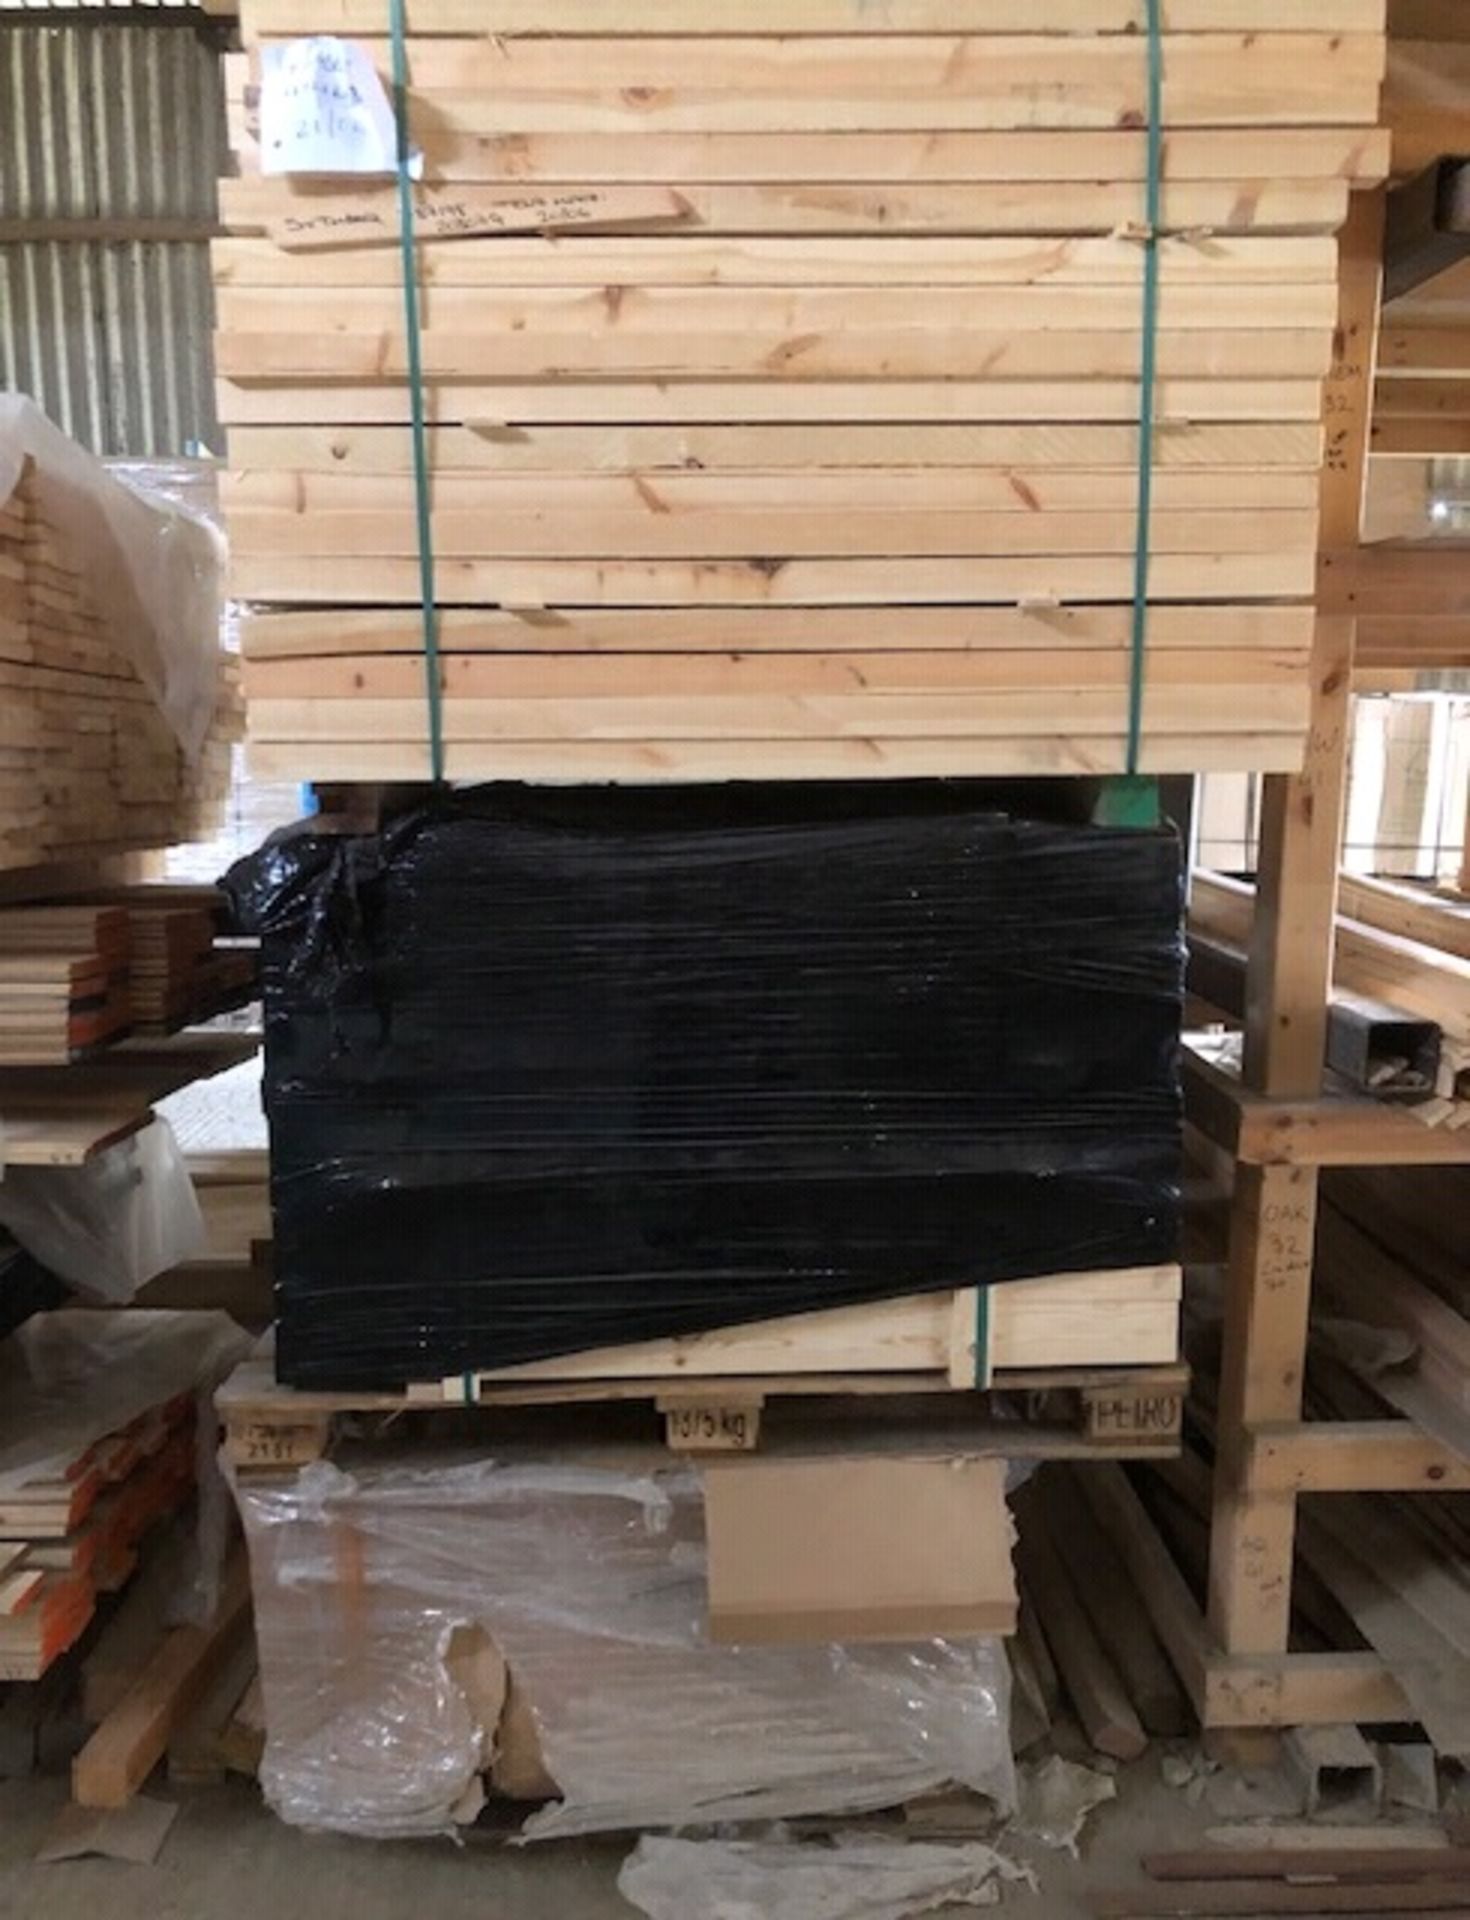 2.5 pallets of timber.